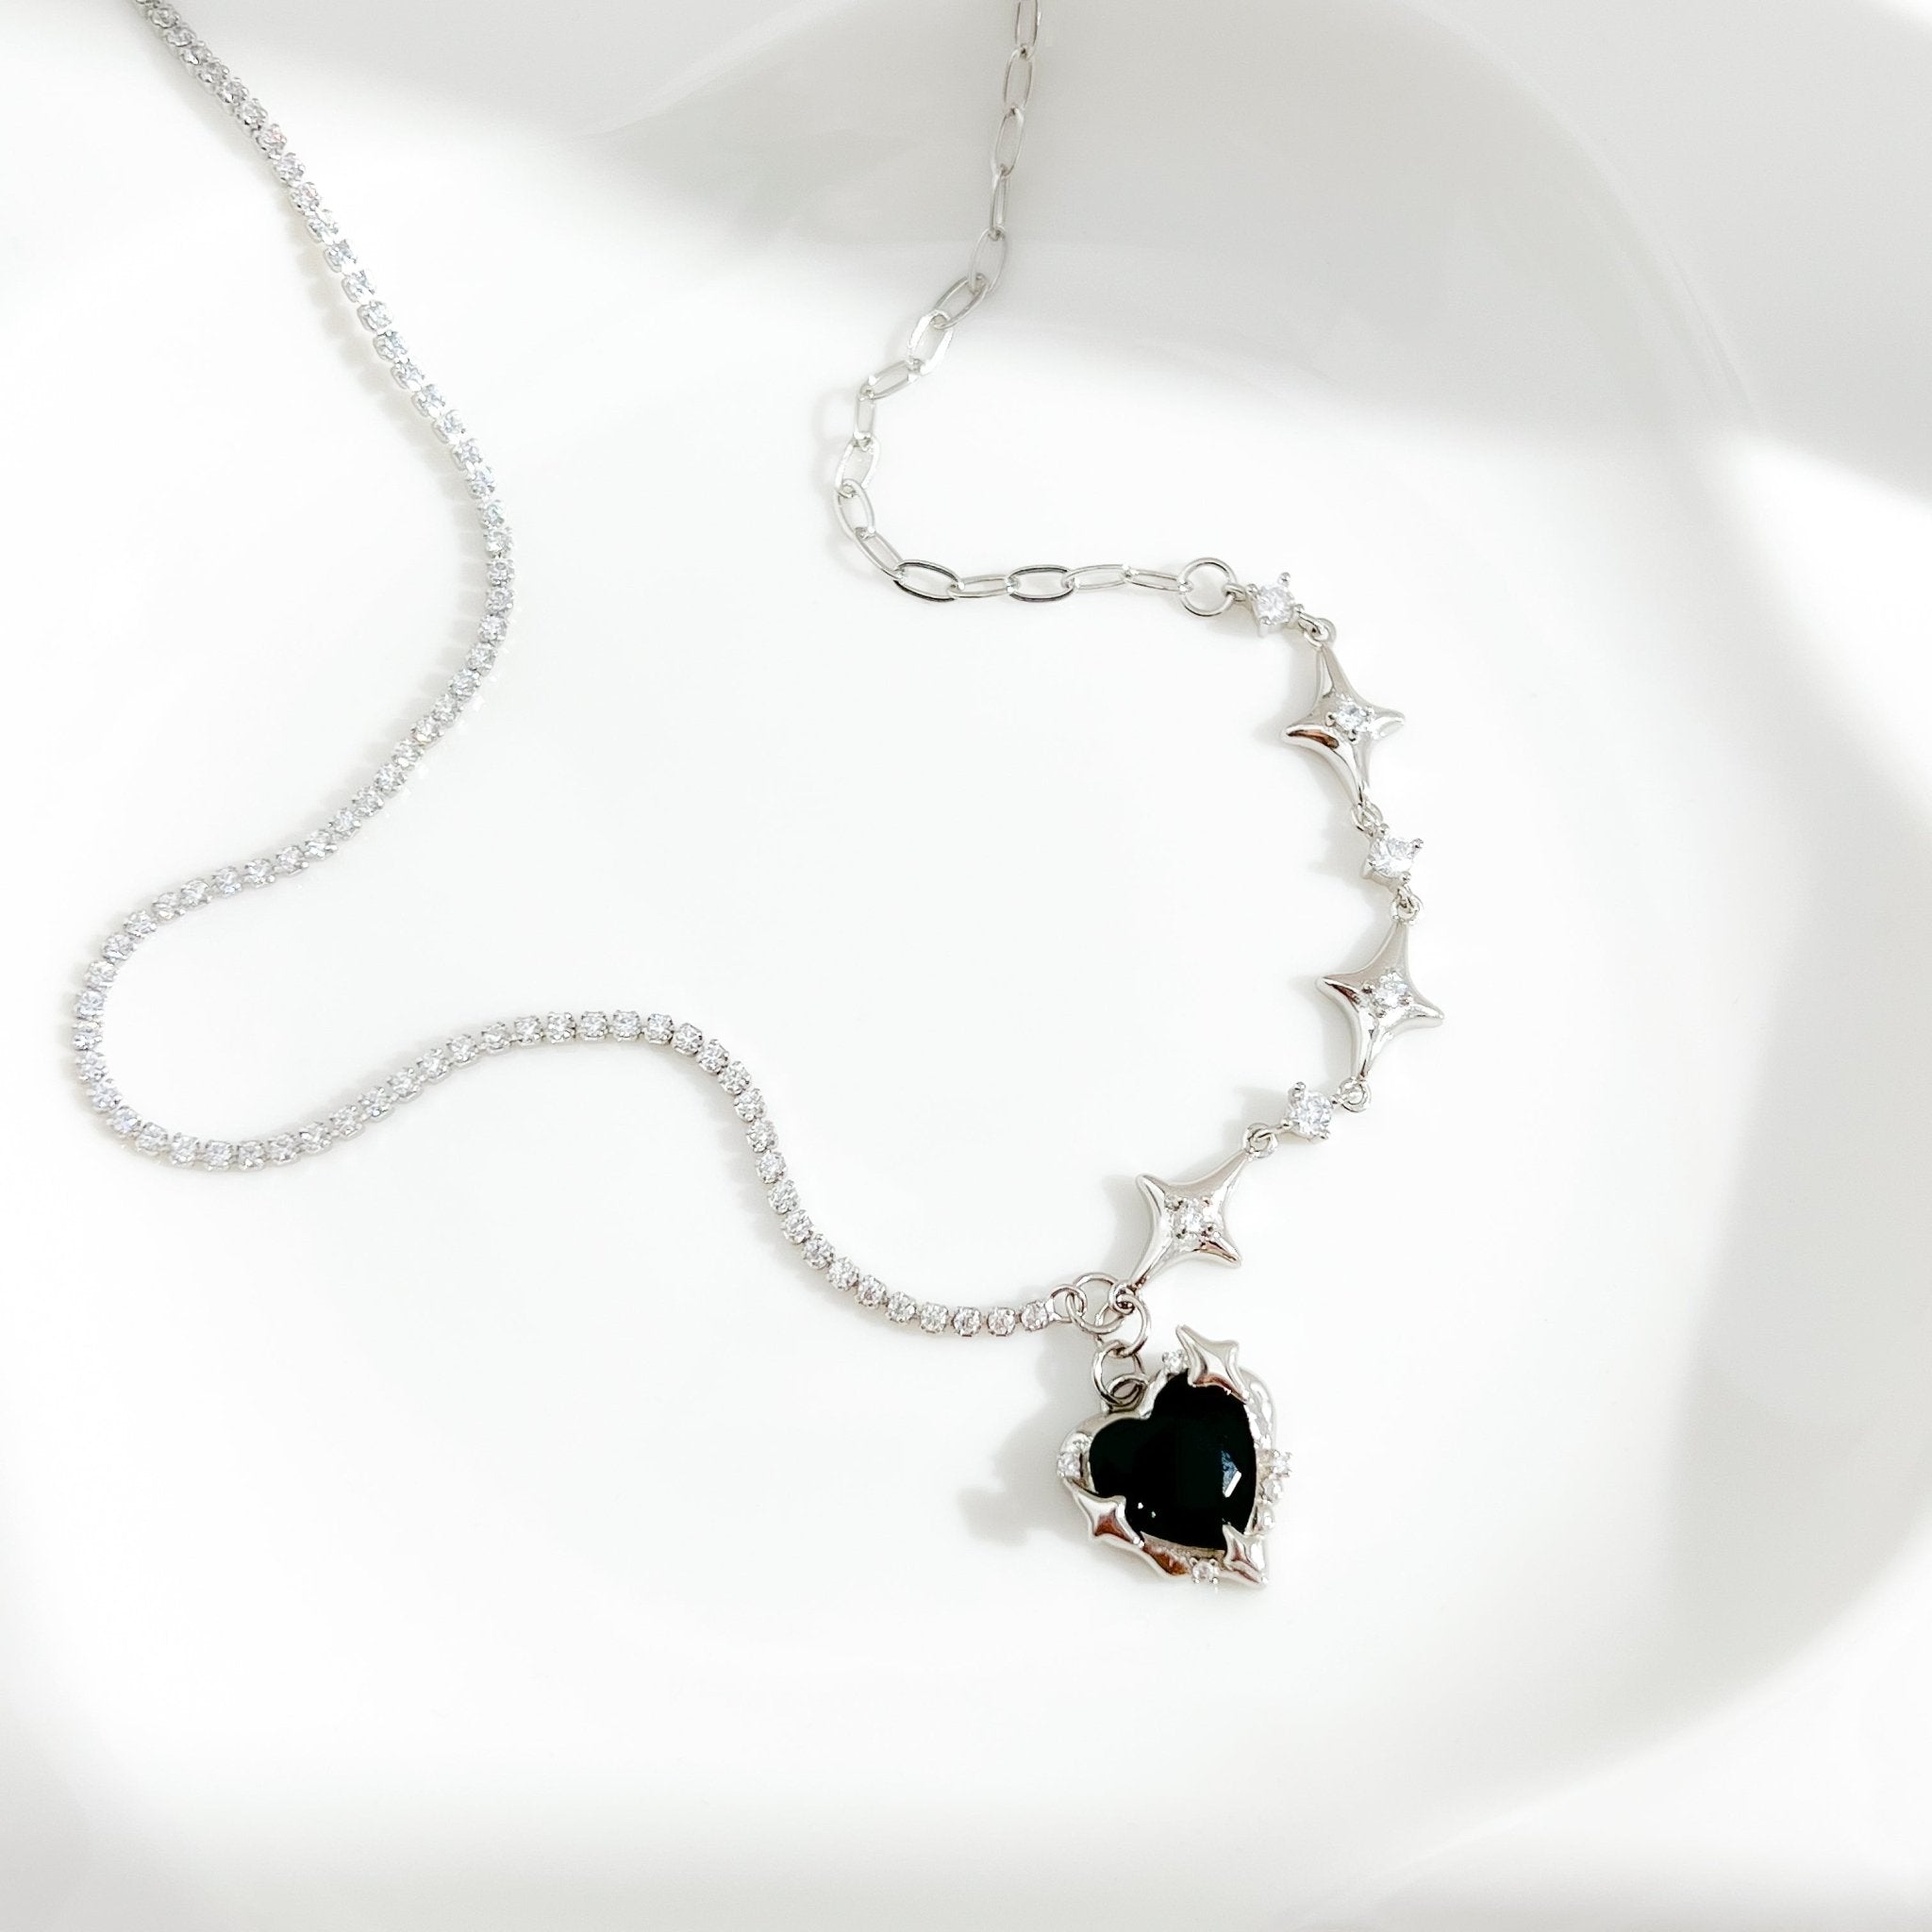 Black Heart Gem Necklace in Sterling Silver - Flaire & Co.